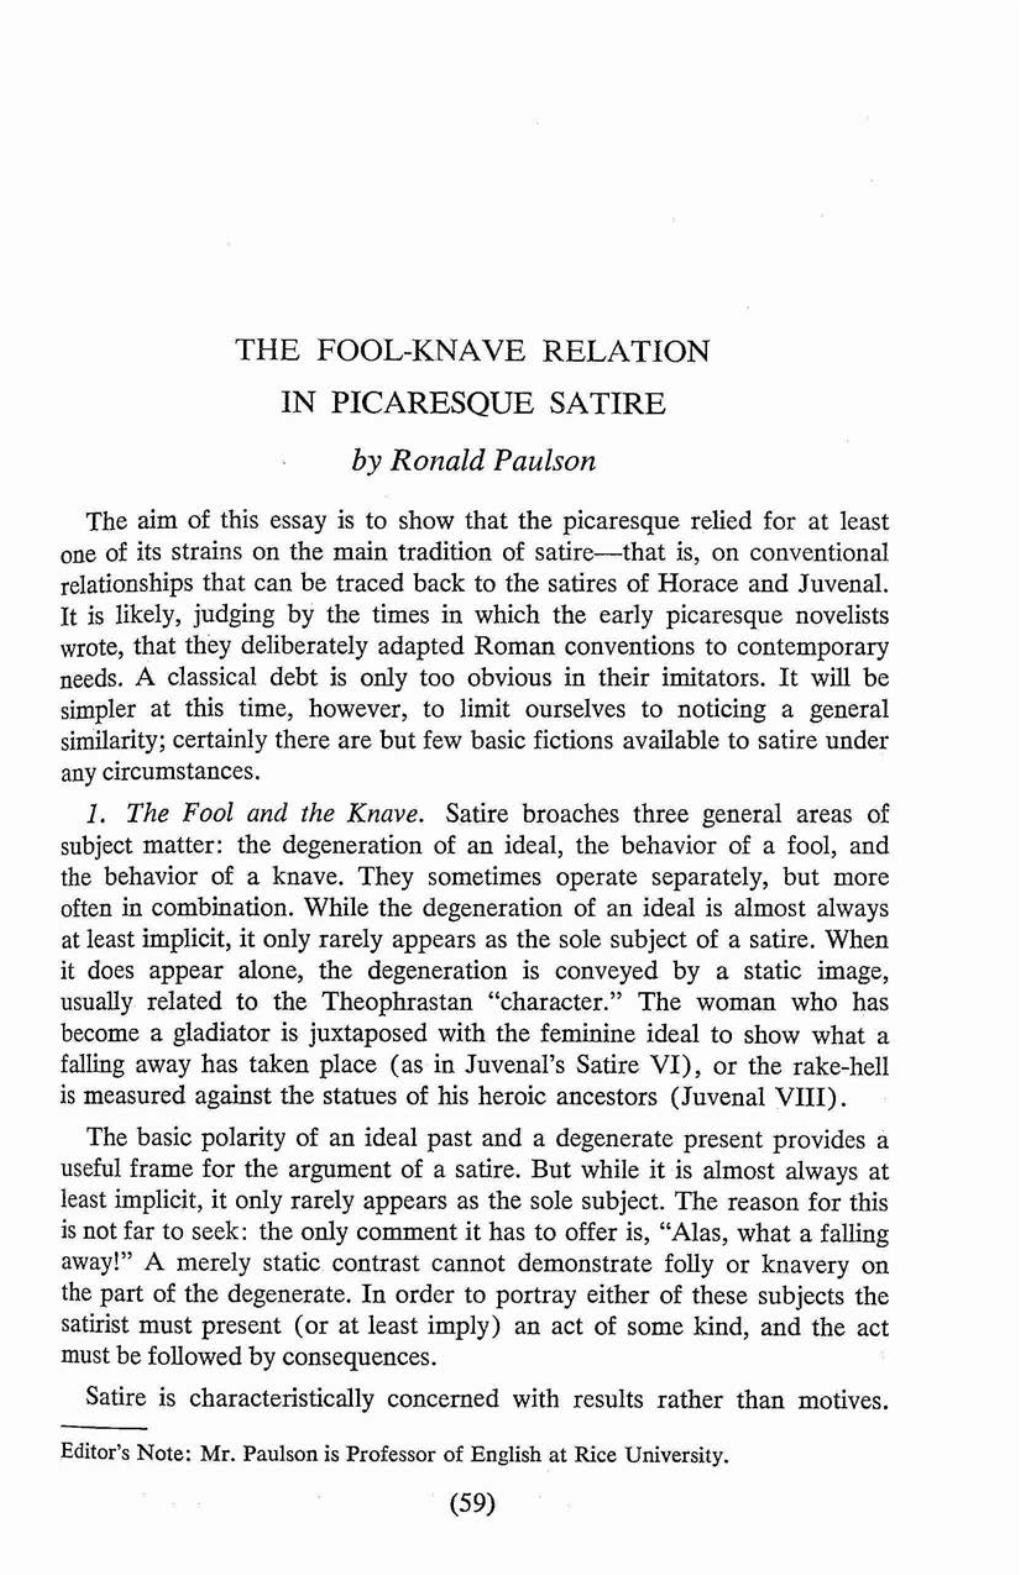 THE FOOL-KNAVE RELATION in PICARESQUE SATIRE by Ronald Paulson